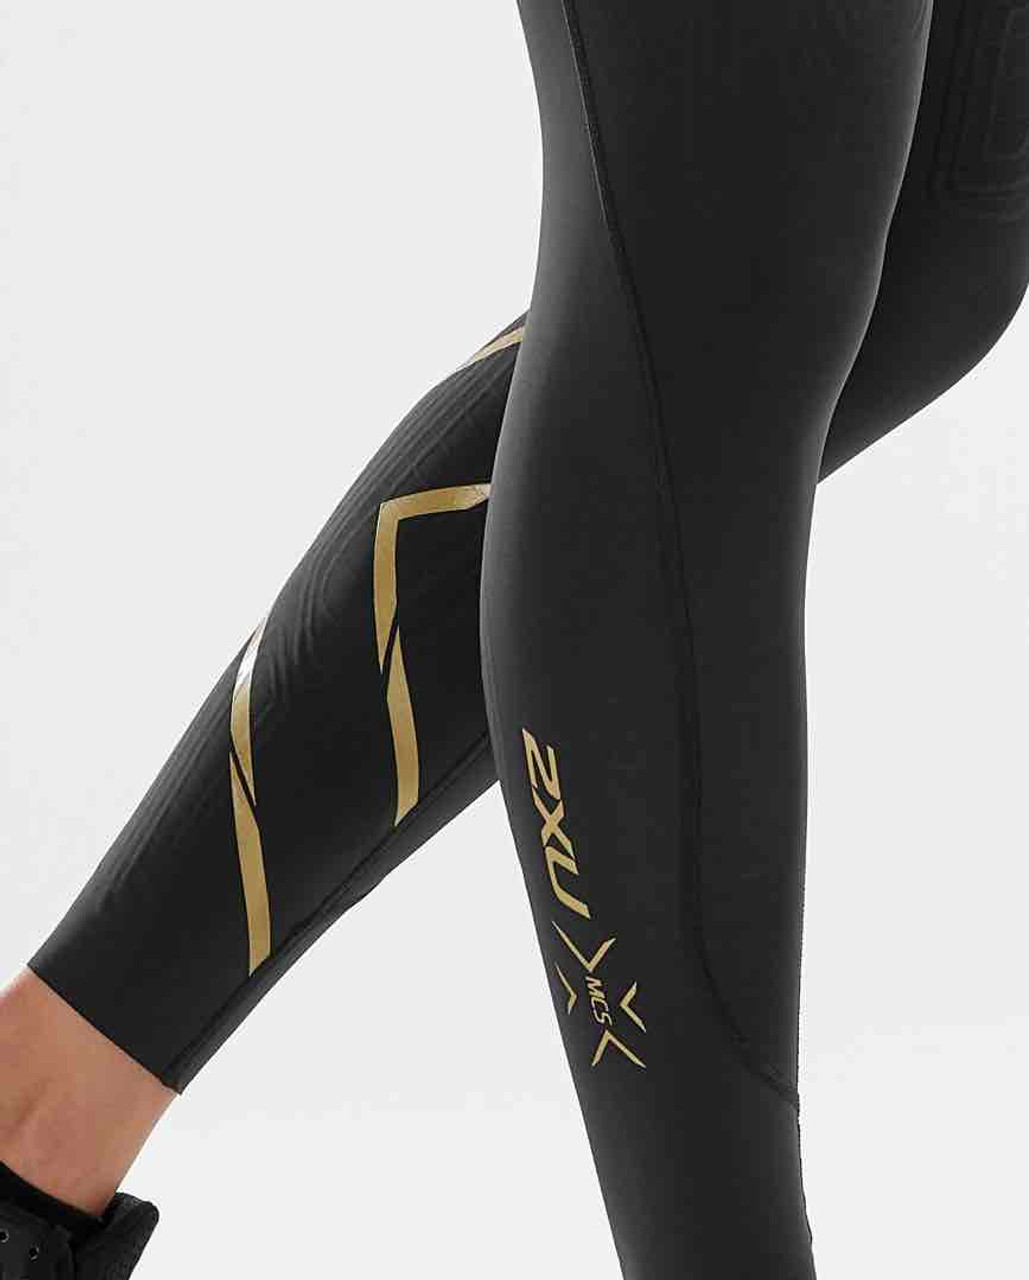 2XU Mcs Cross Training Bonded Mid-Rise Compression Tights